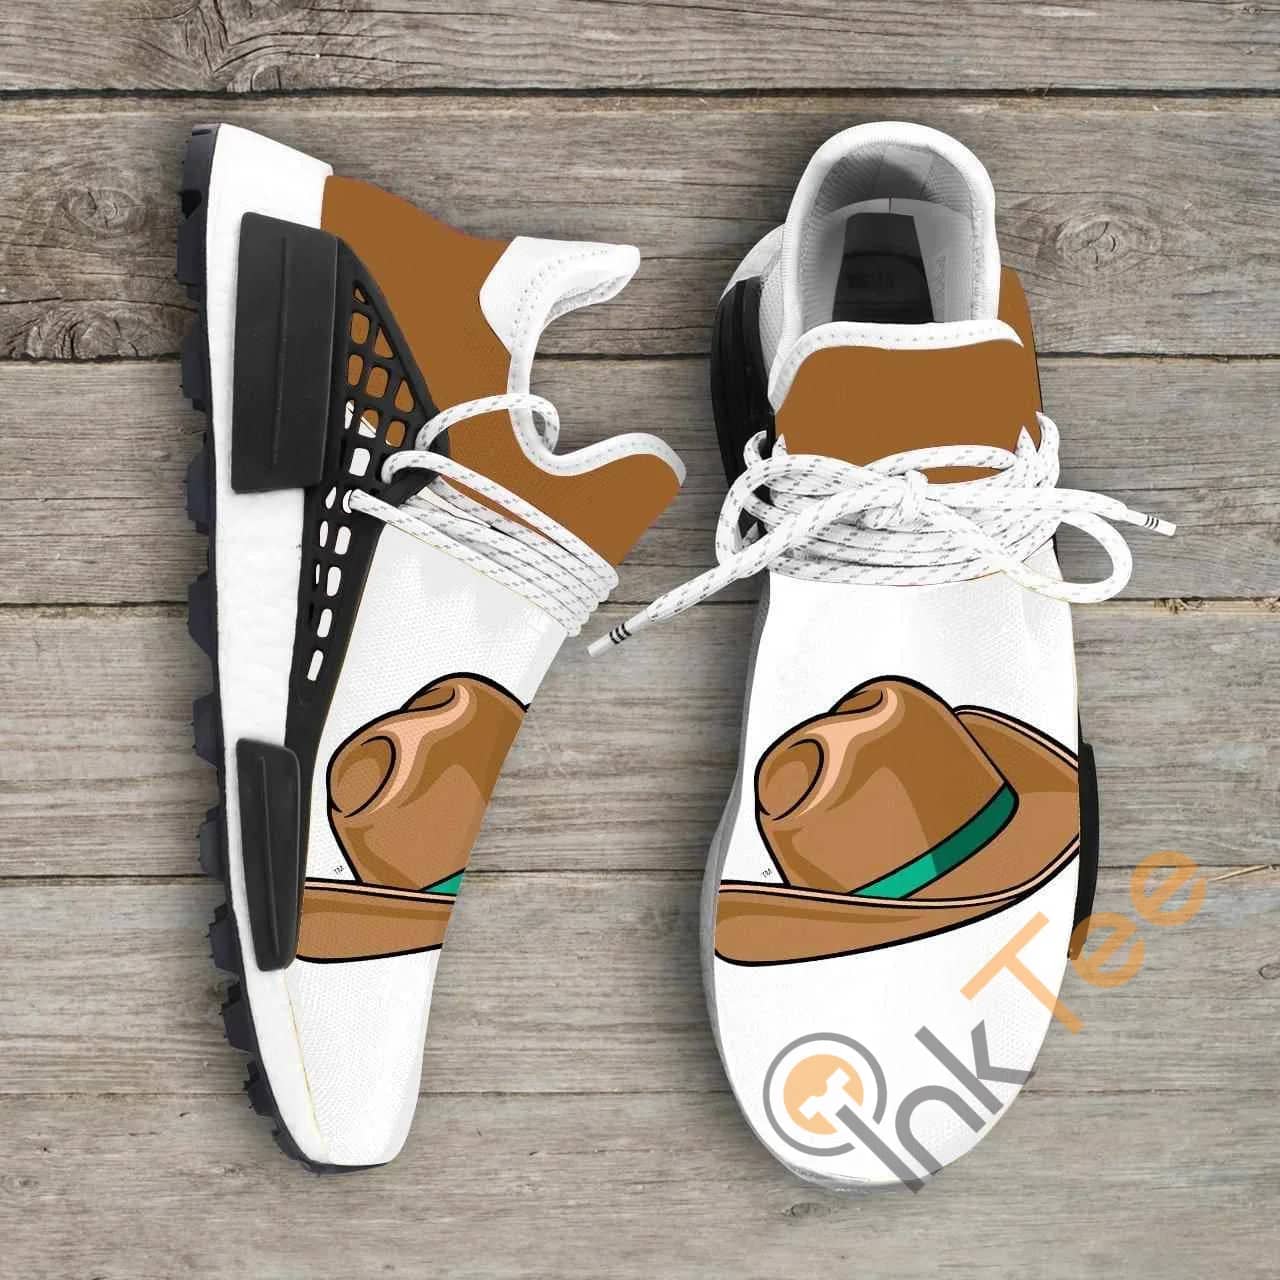 Stetson Hatters Ncaa NMD Human Shoes